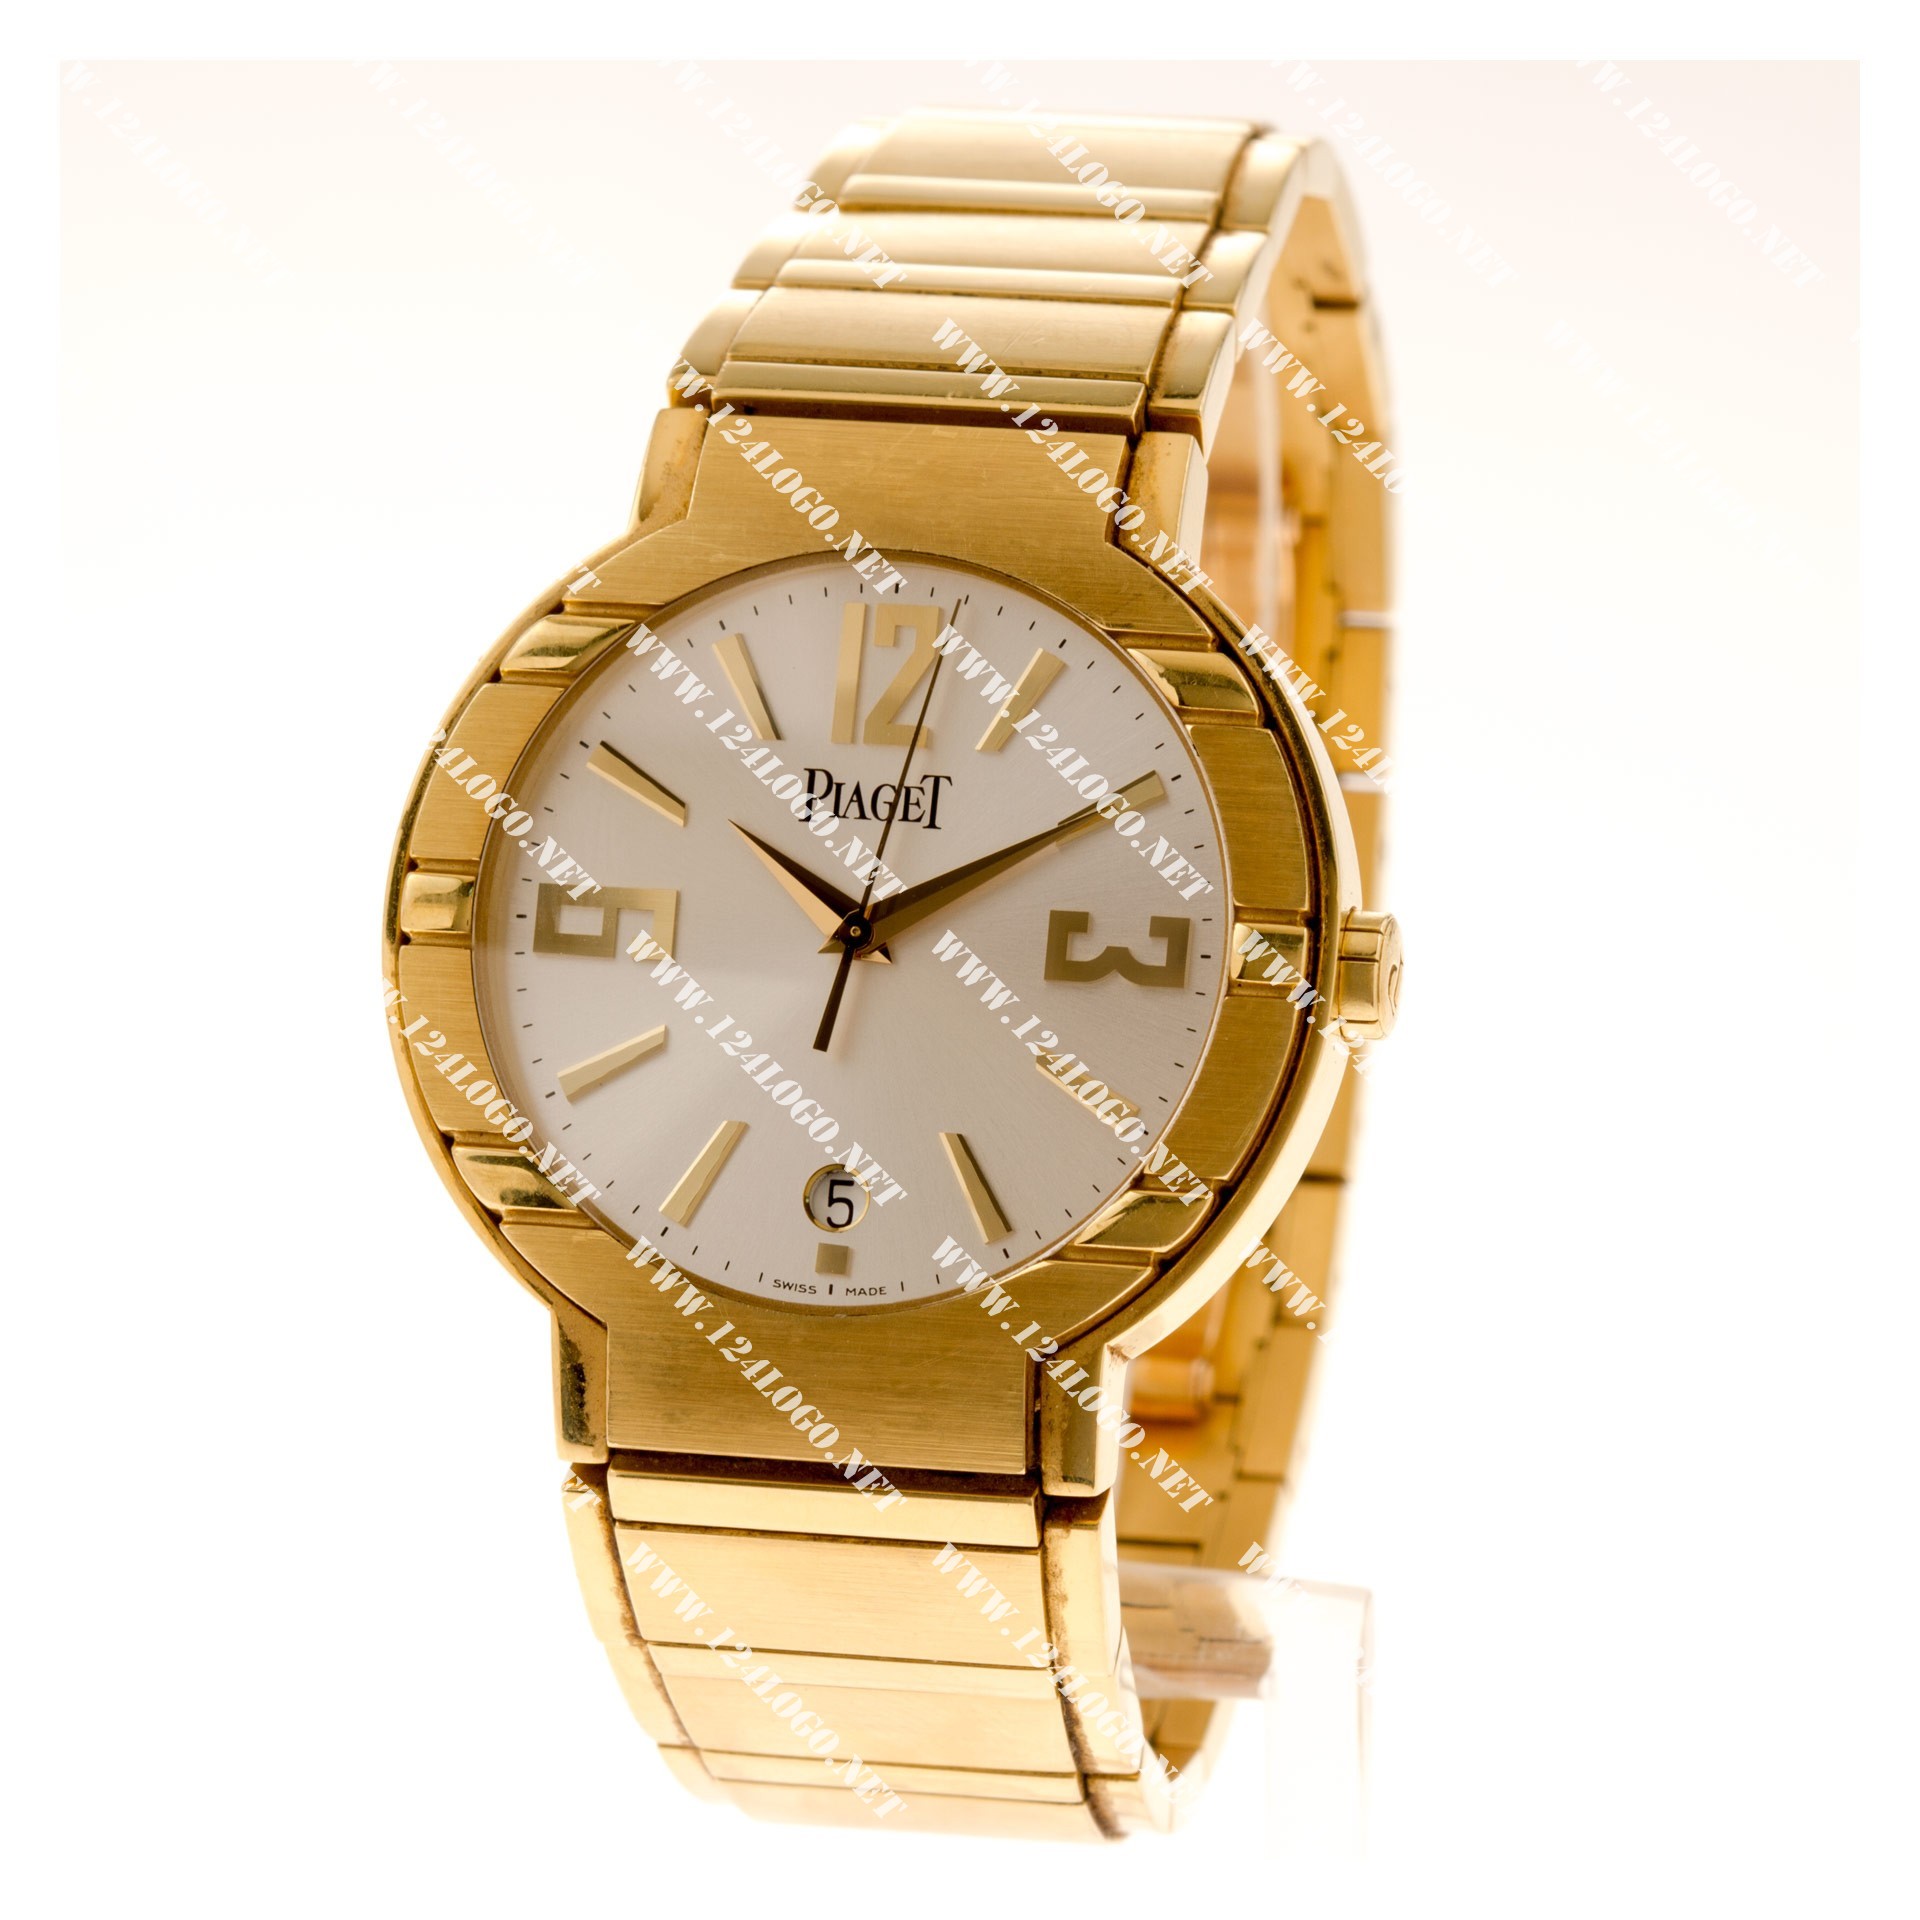 Replica Piaget Polo Mens-Yellow-Gold-Current-Style GOA26021